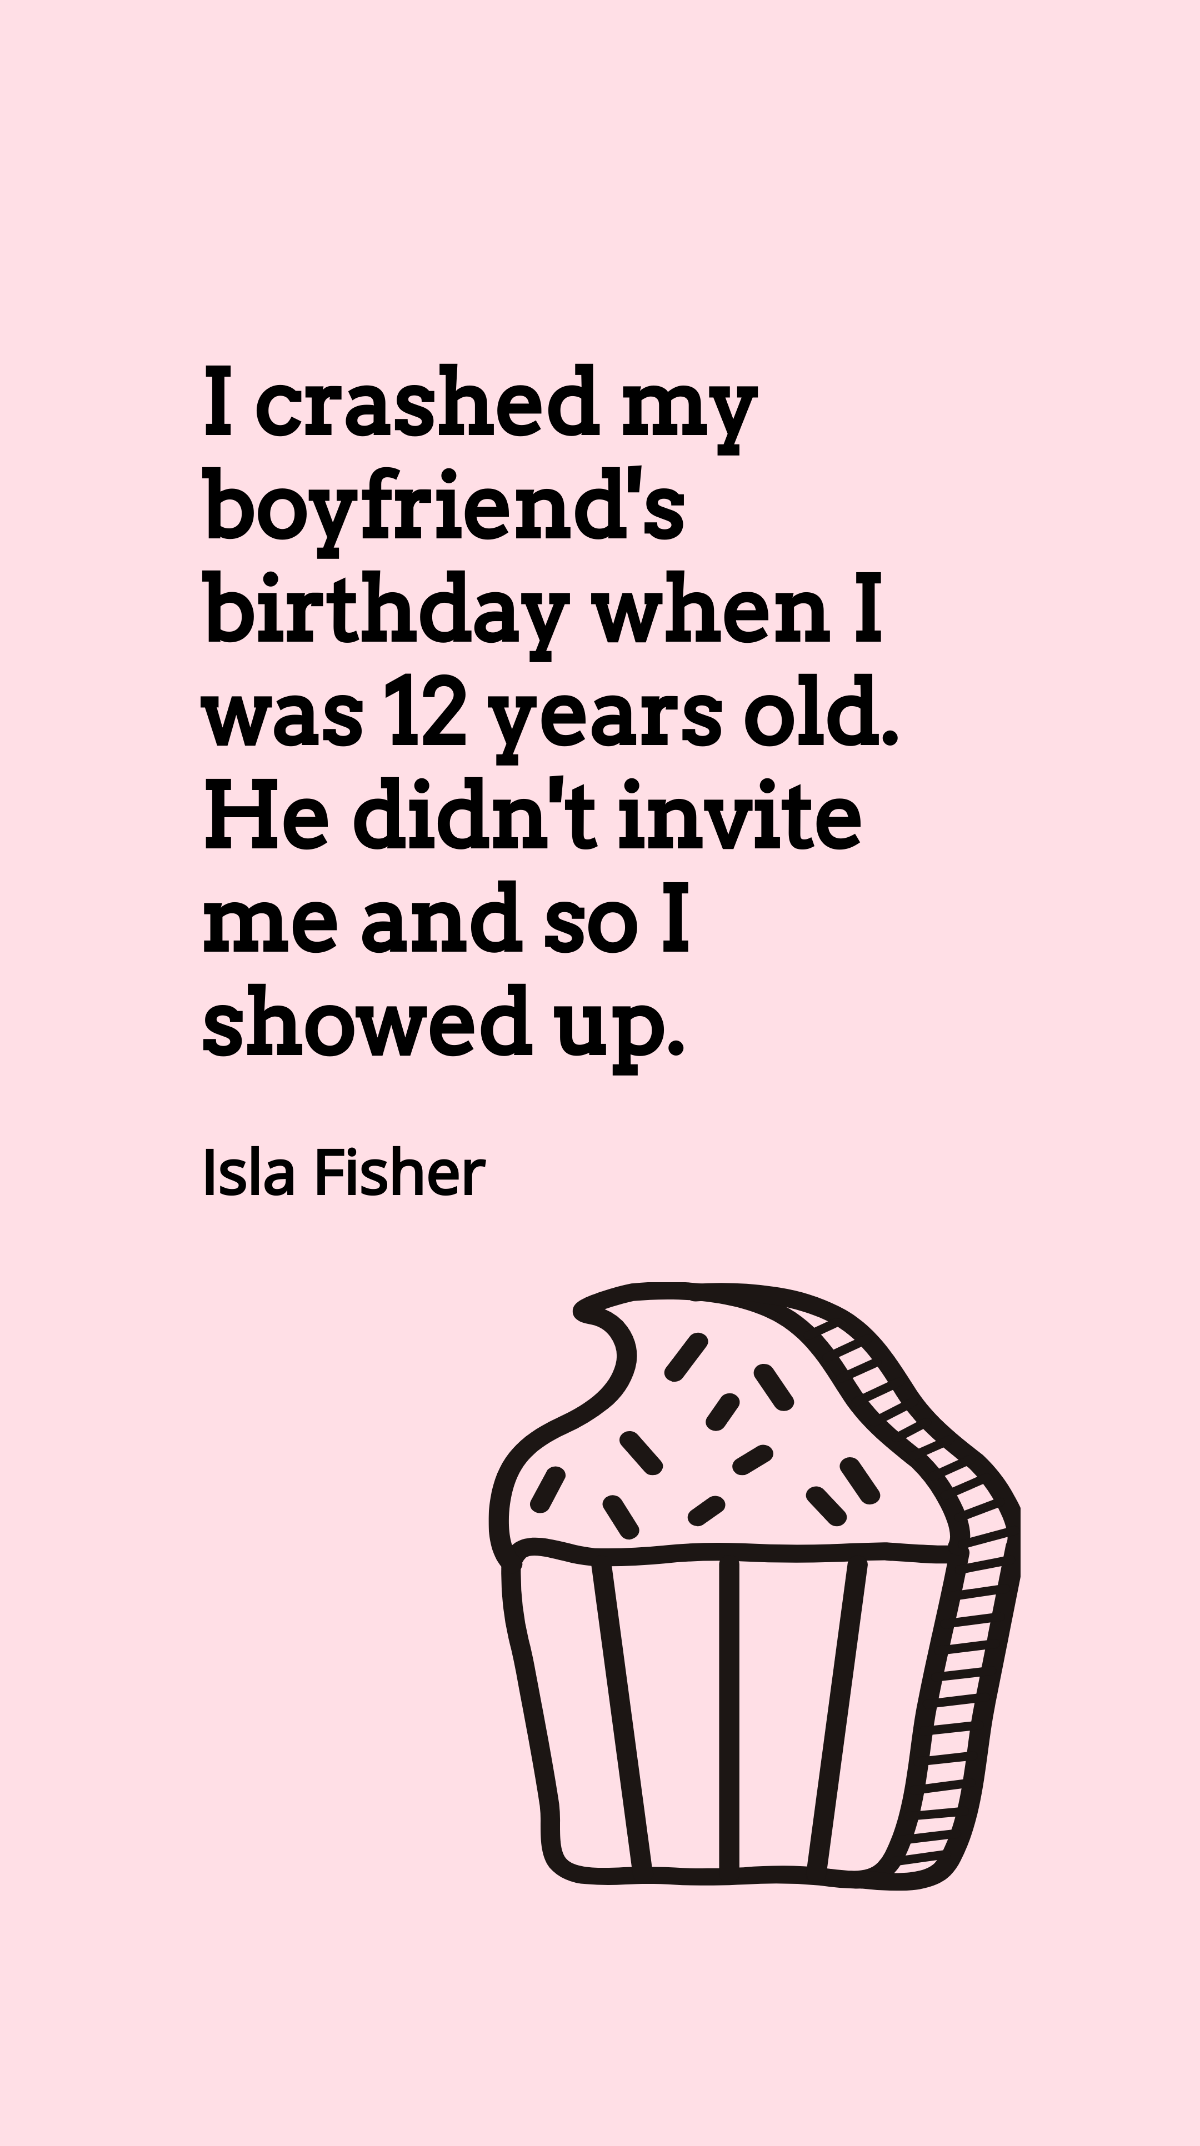 Isla Fisher - I crashed my boyfriend's birthday when I was 12 years old. He didn't invite me and so I showed up.